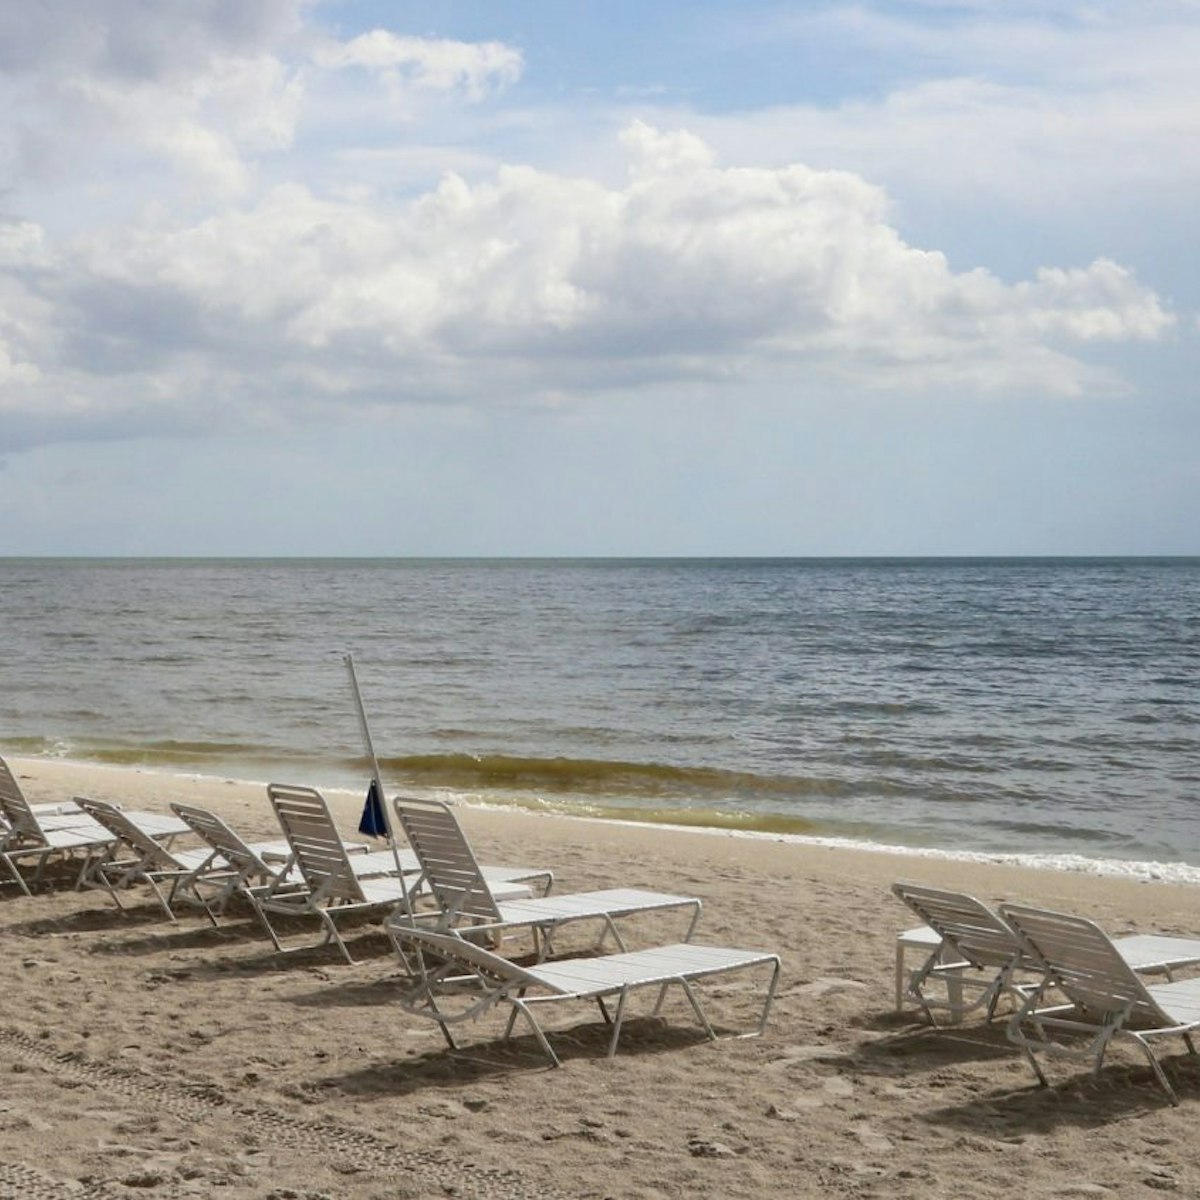 Row of lounge chairs on a scenic ocean beach, Delnor-Wiggins Pass State Park, Naples, Florida, USA - stock photo
